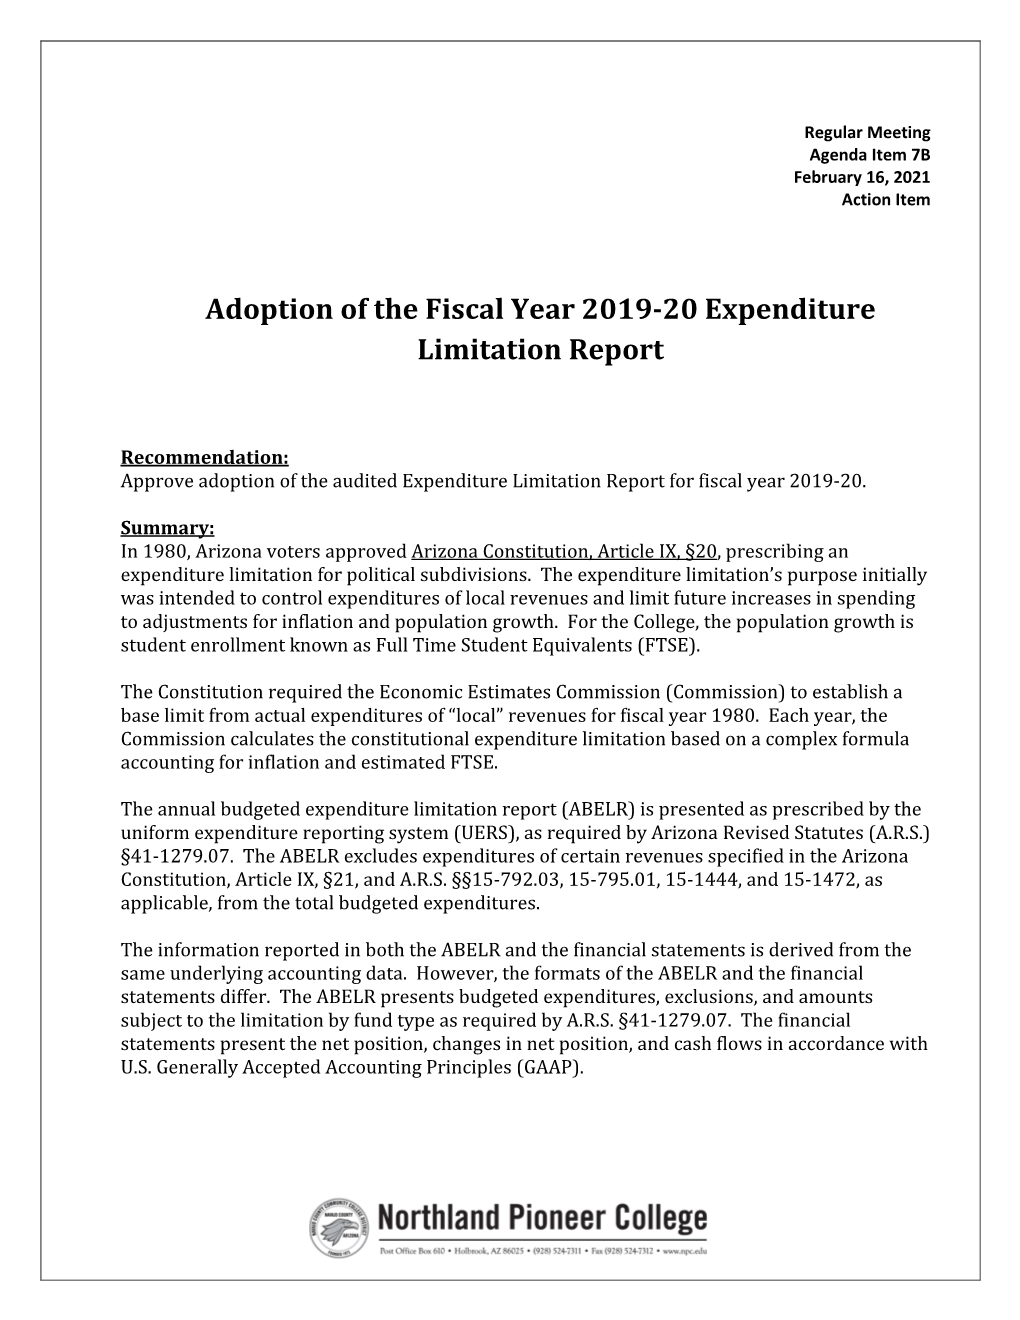 Adoption of the Fiscal Year 2019-20 Expenditure Limitation Report